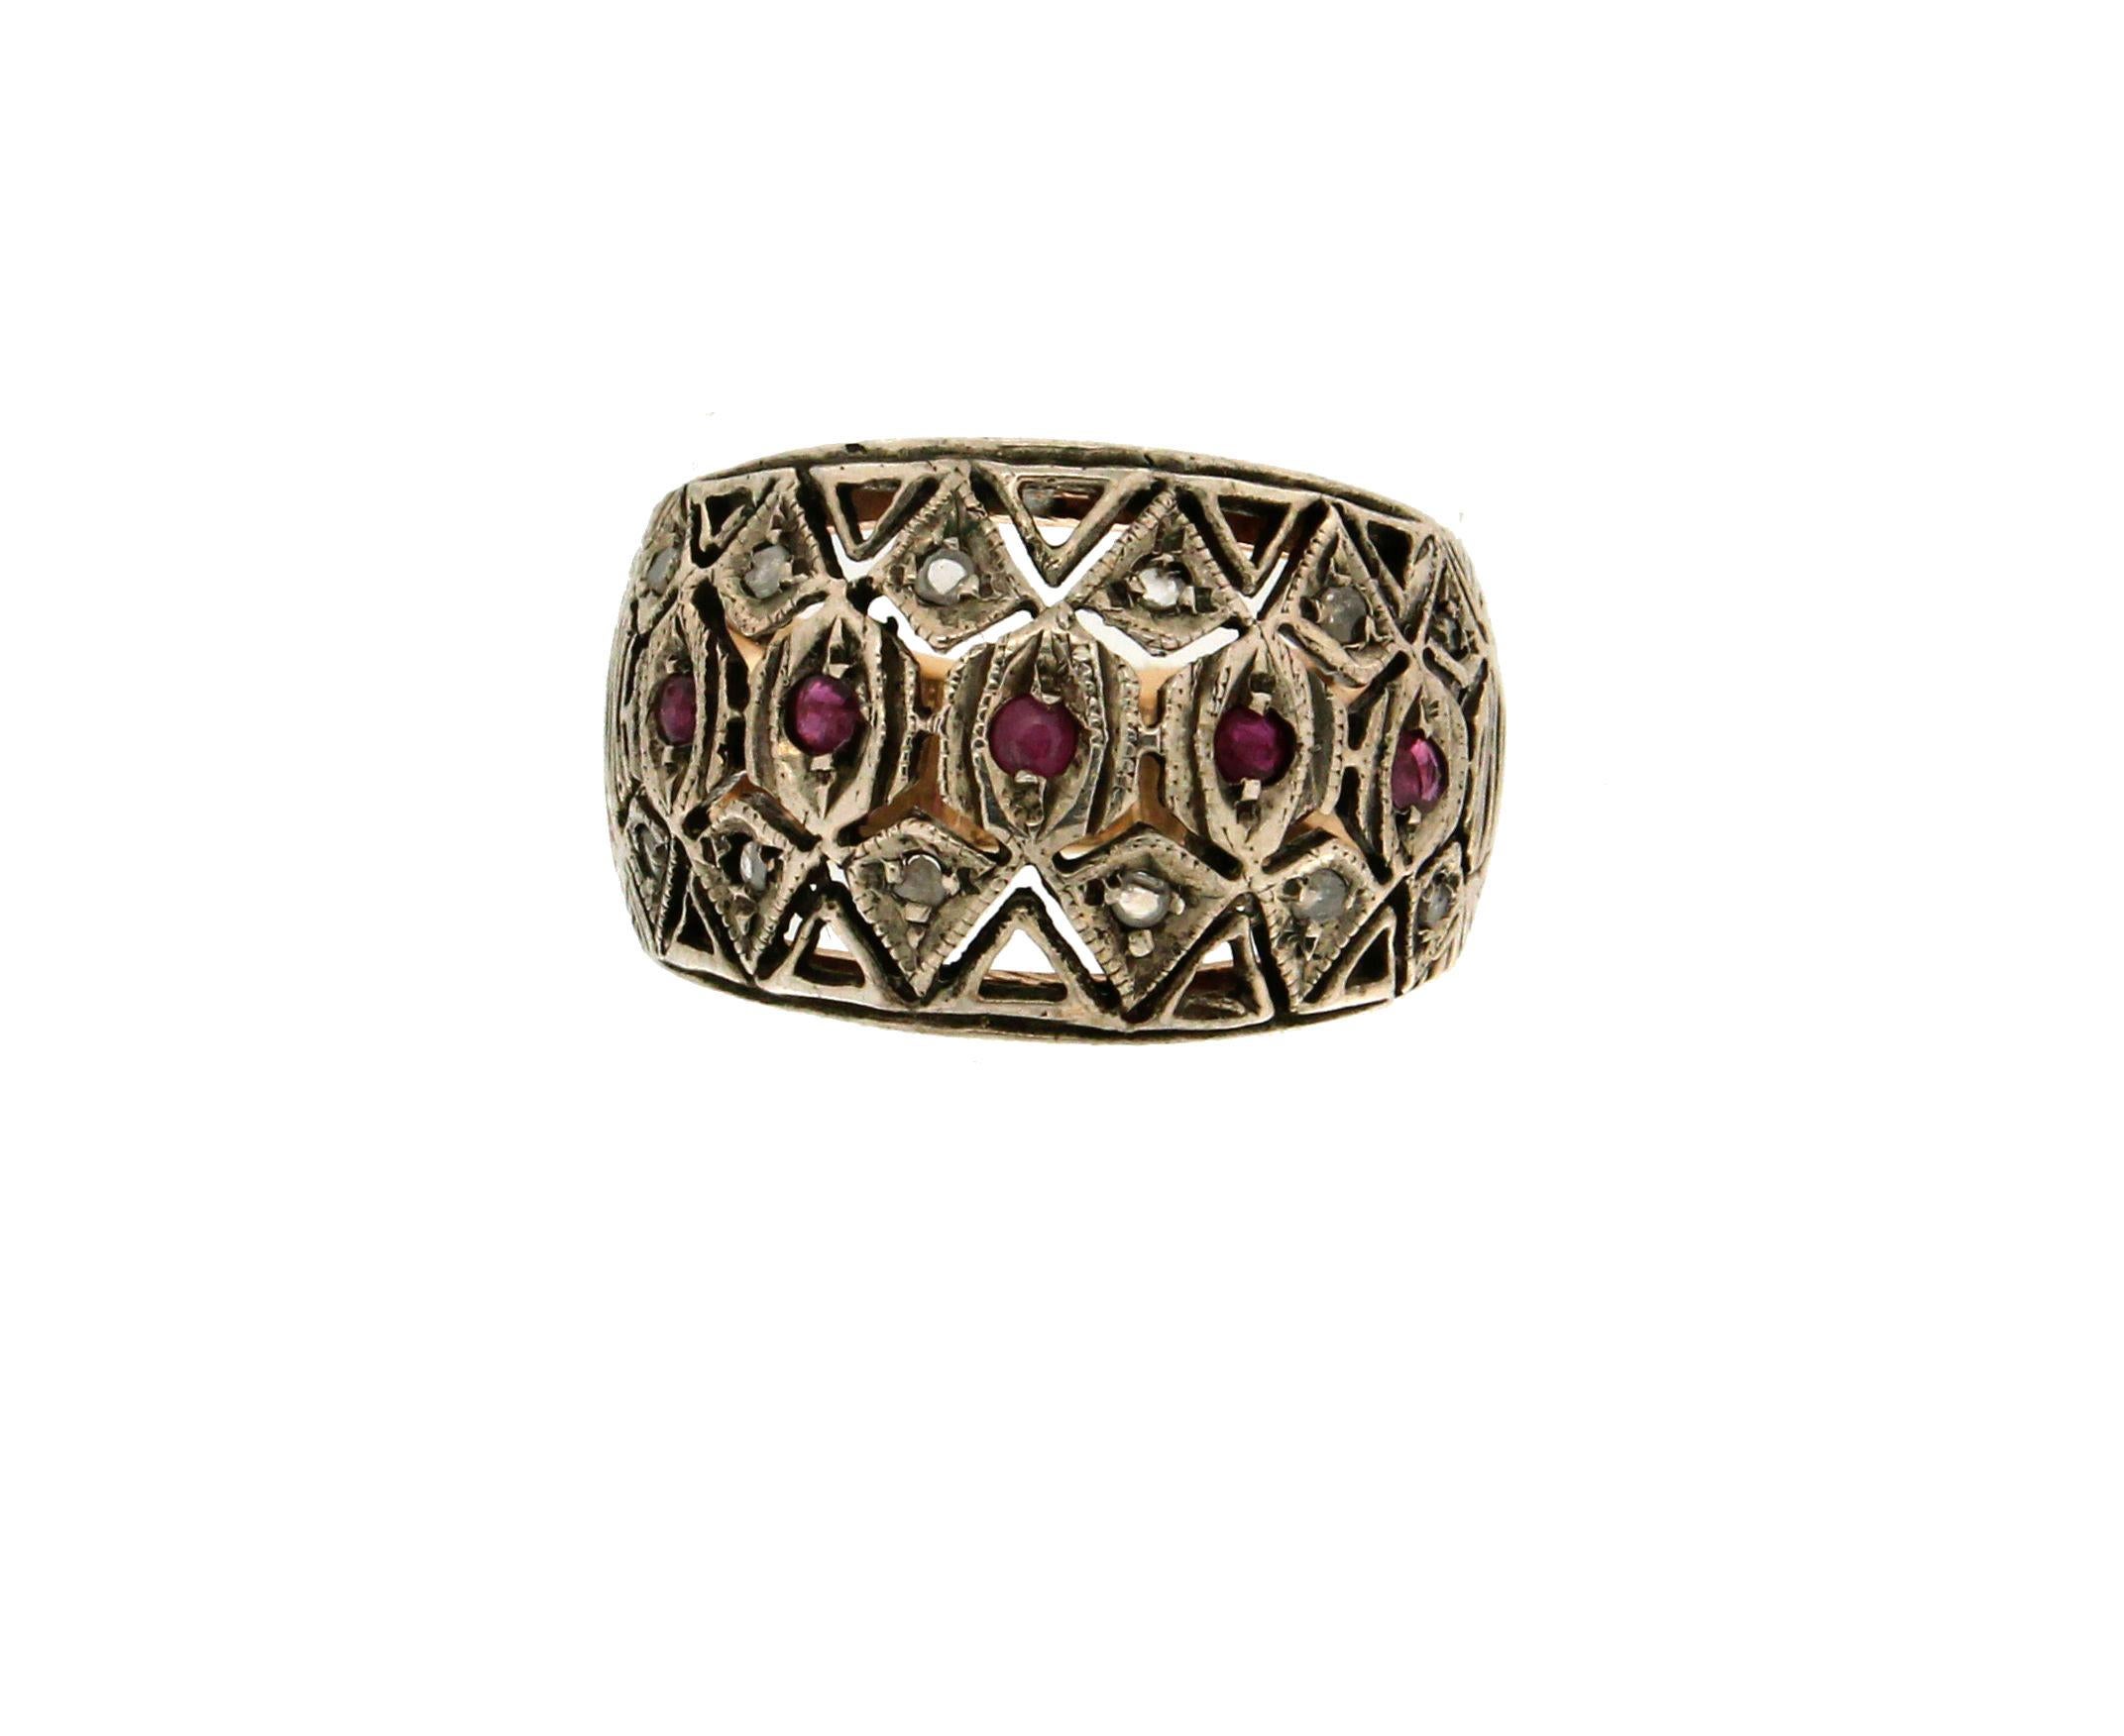 14 Karat yellow gold and silver cocktail ring. Handmade with ruby and diamonds.

diamonds weight 0.31 karat
Ruby weight 0.15 karat
Ring total weight 7.20 grams
Ring size ITA 16 - US 7.75